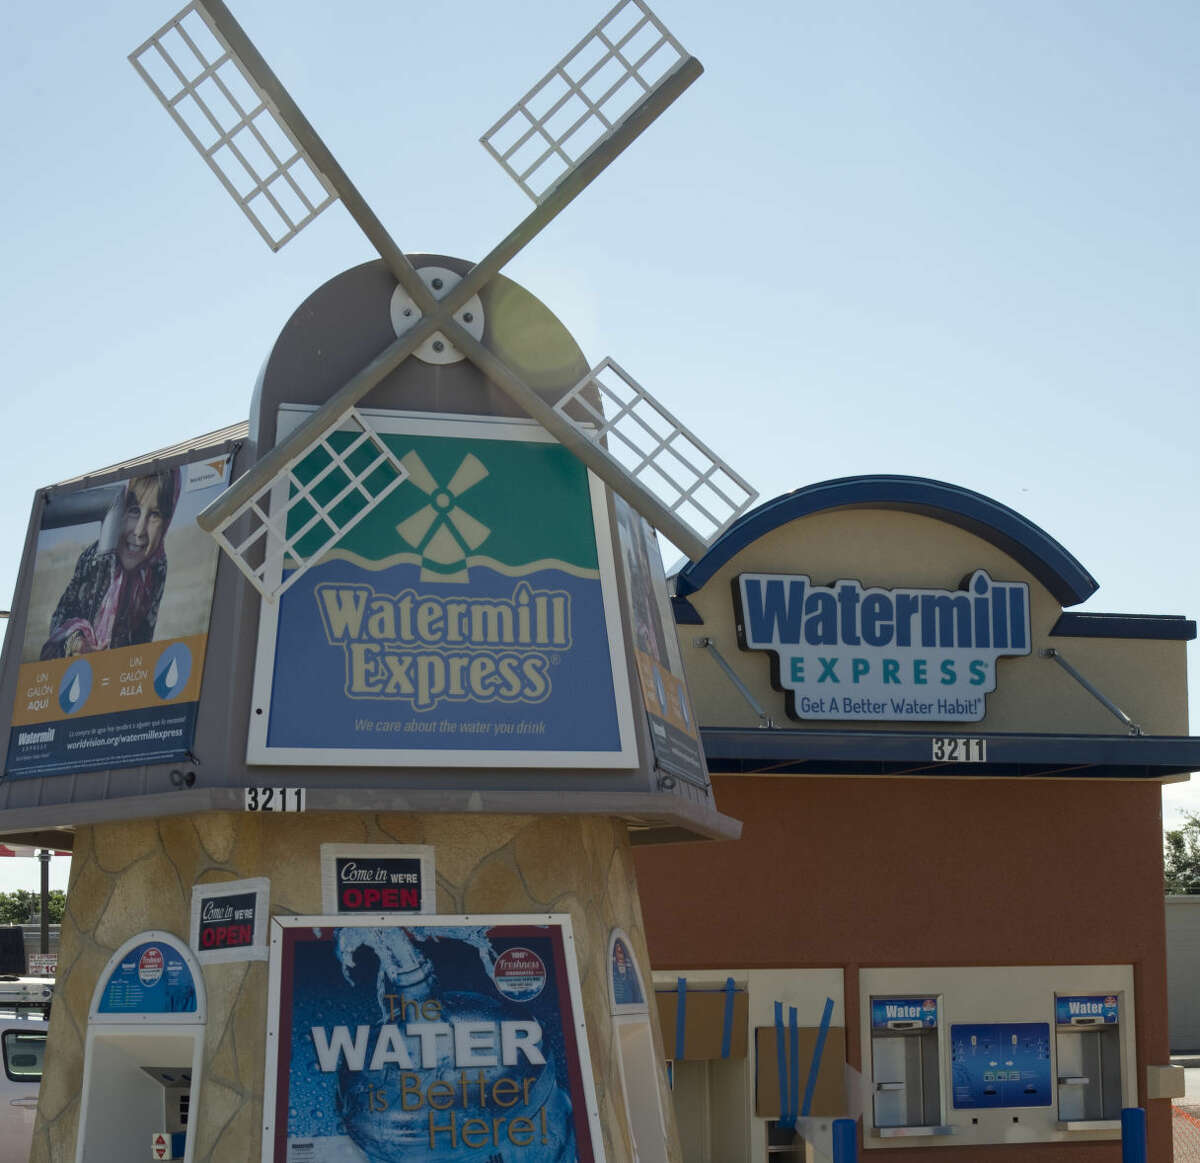 Water – Watermill Express